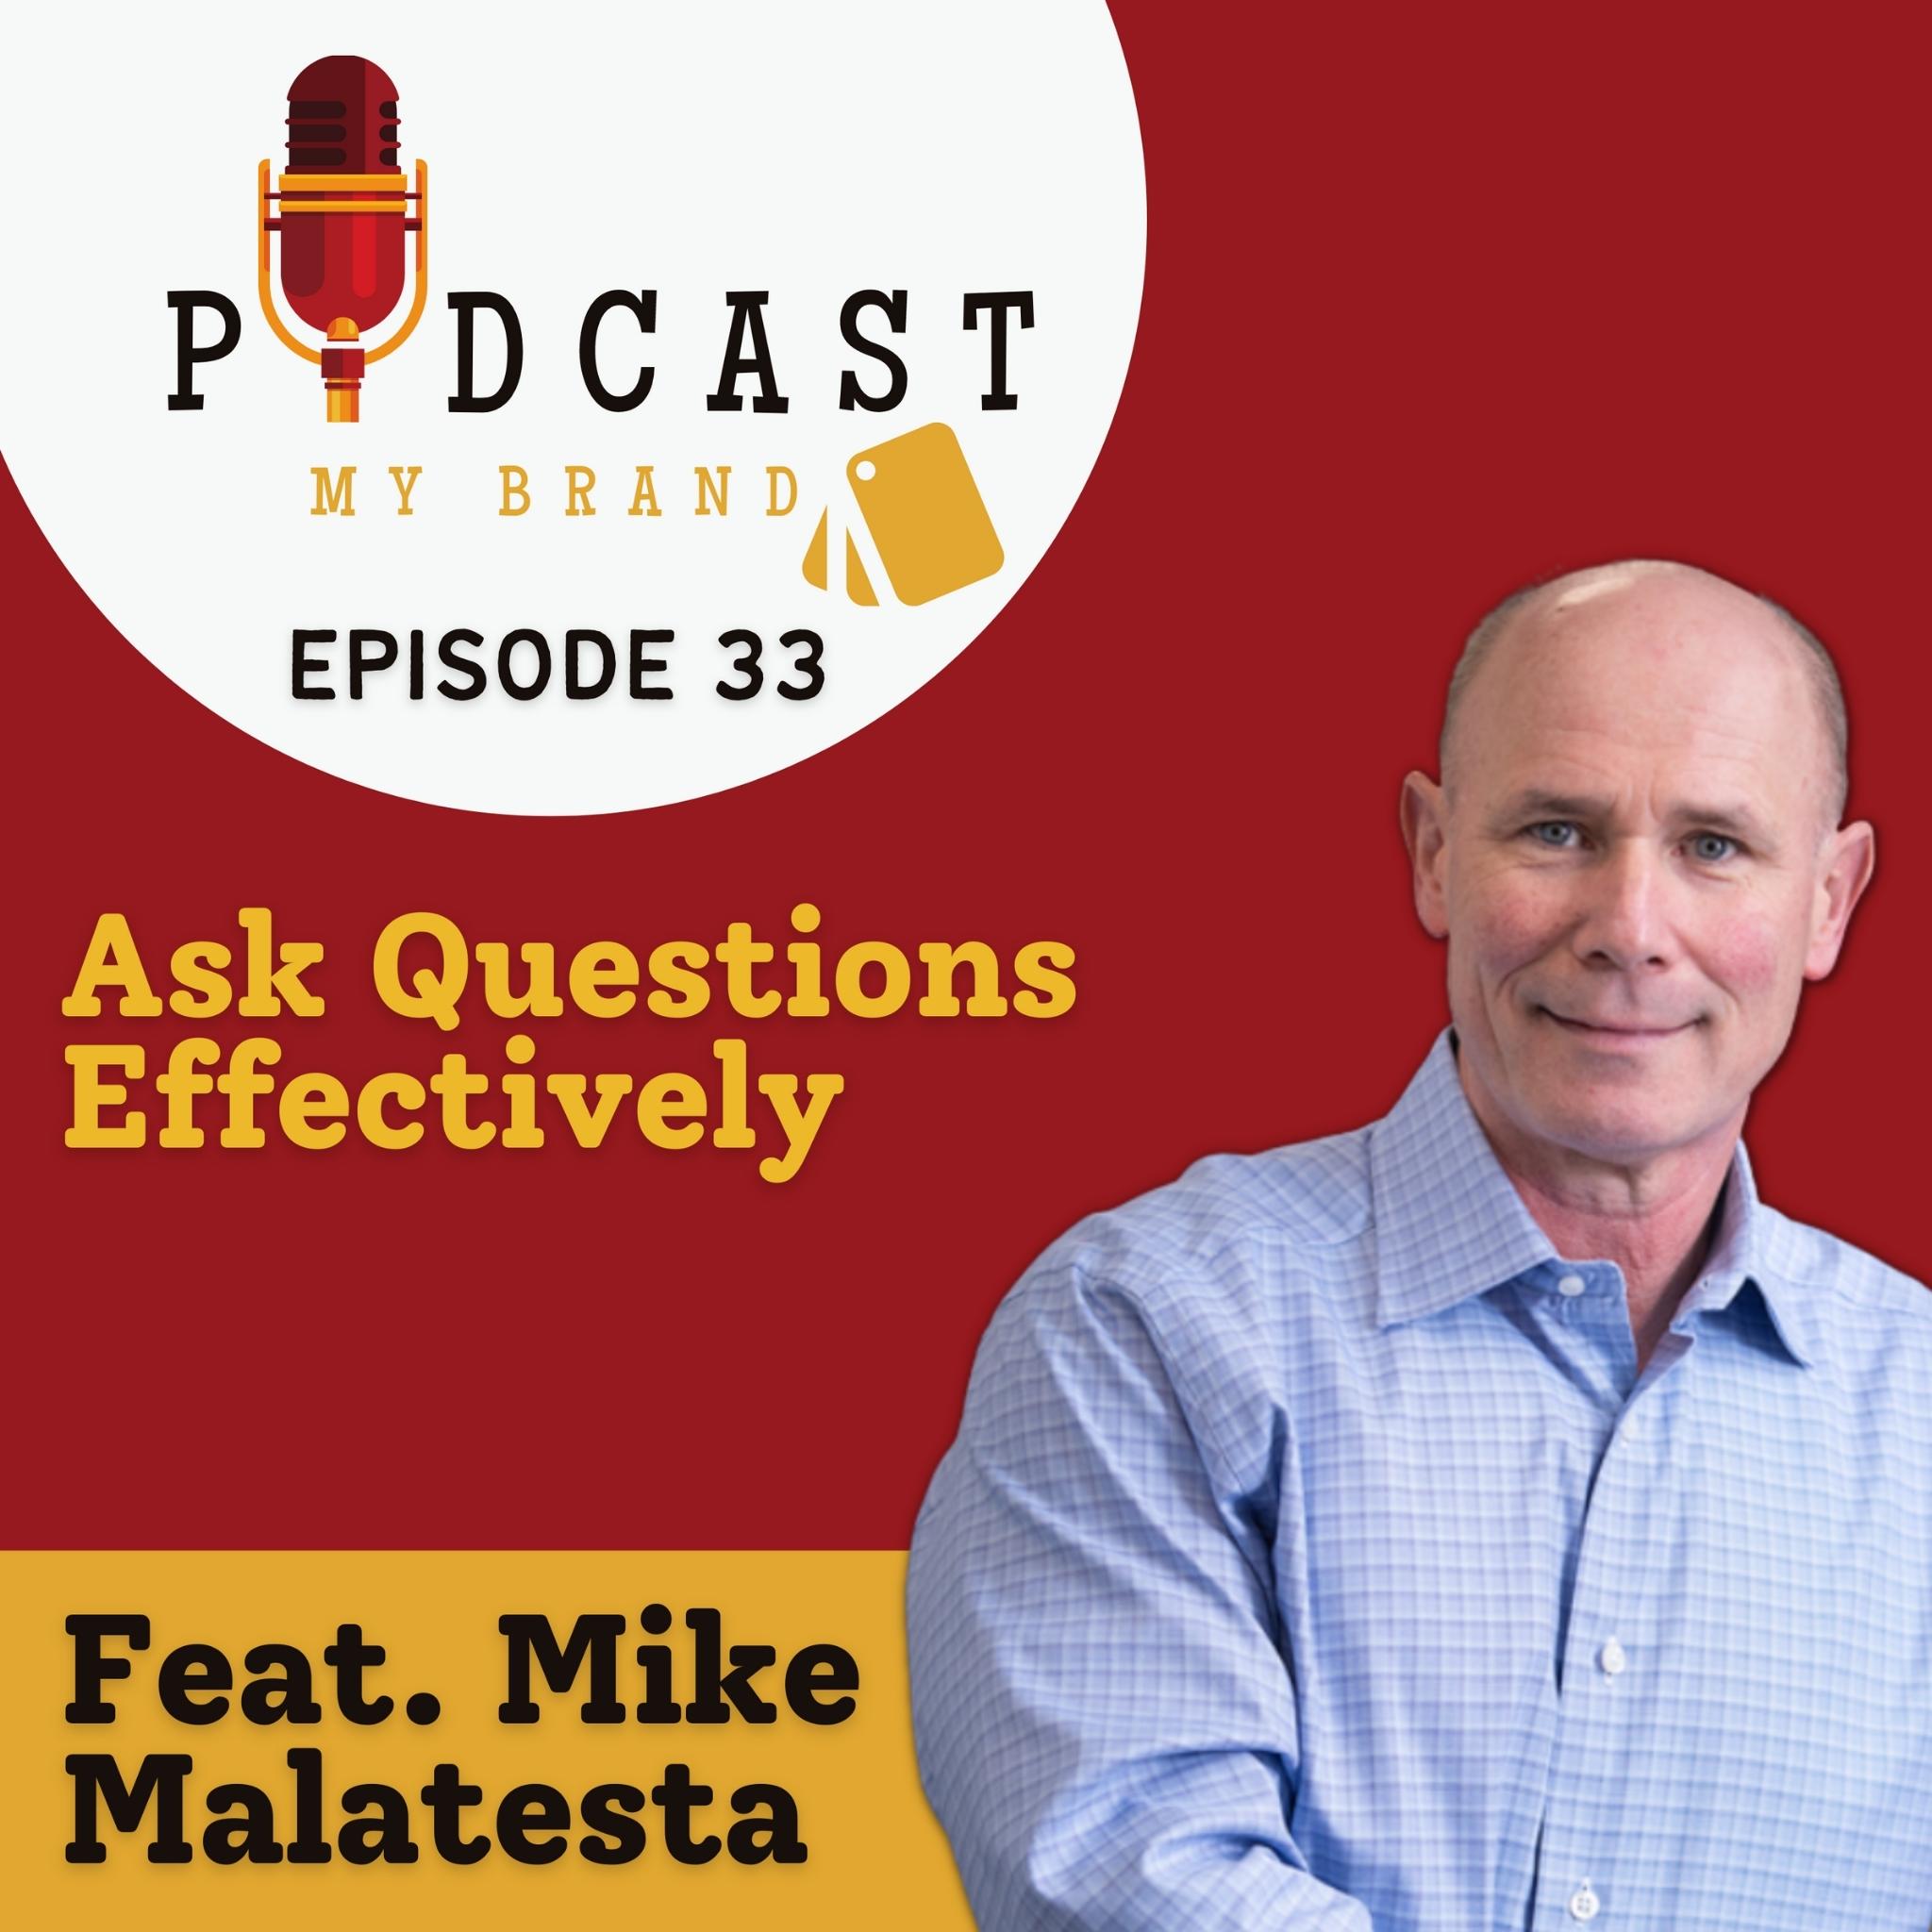 Ask Questions Effectively with Mike Malatesta